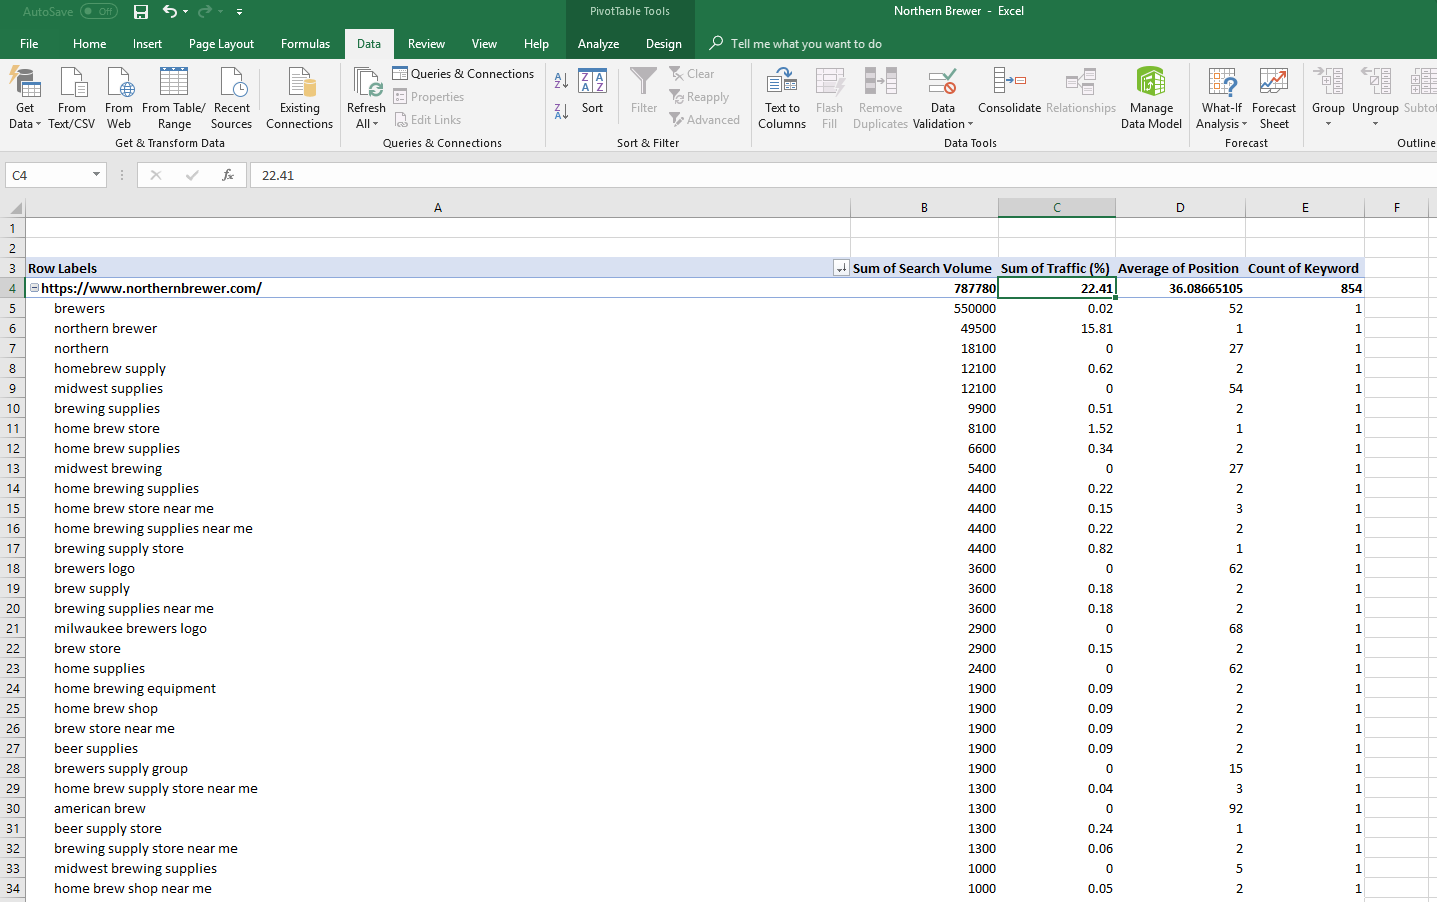 Resorted Pivot Table